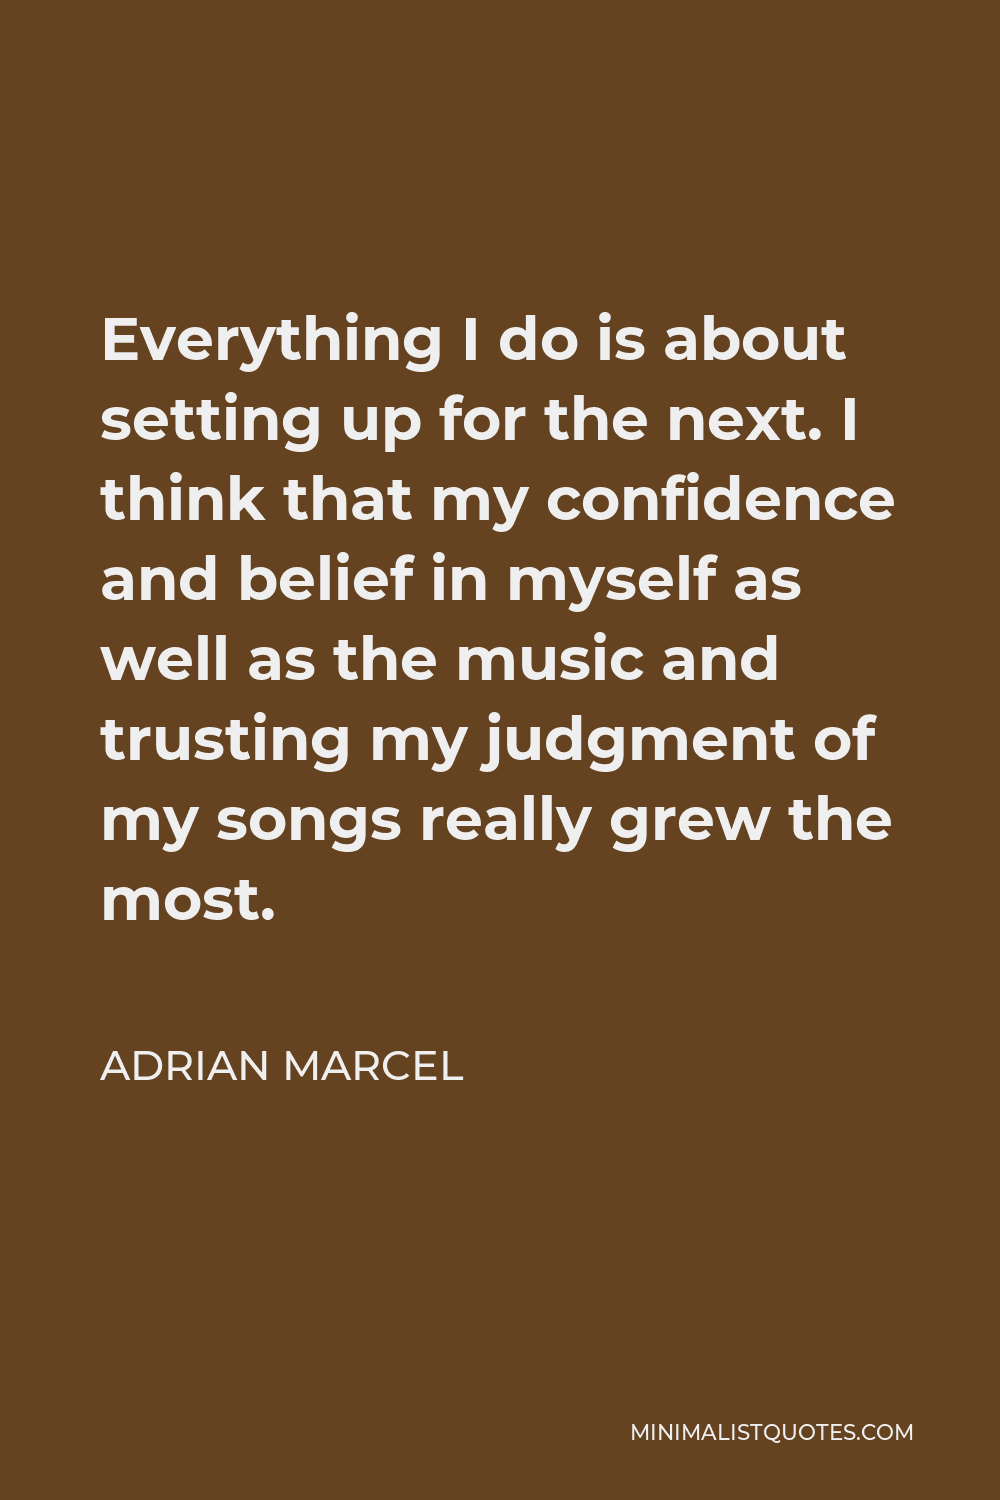 Adrian Marcel Quote - Everything I do is about setting up for the next. I think that my confidence and belief in myself as well as the music and trusting my judgment of my songs really grew the most.